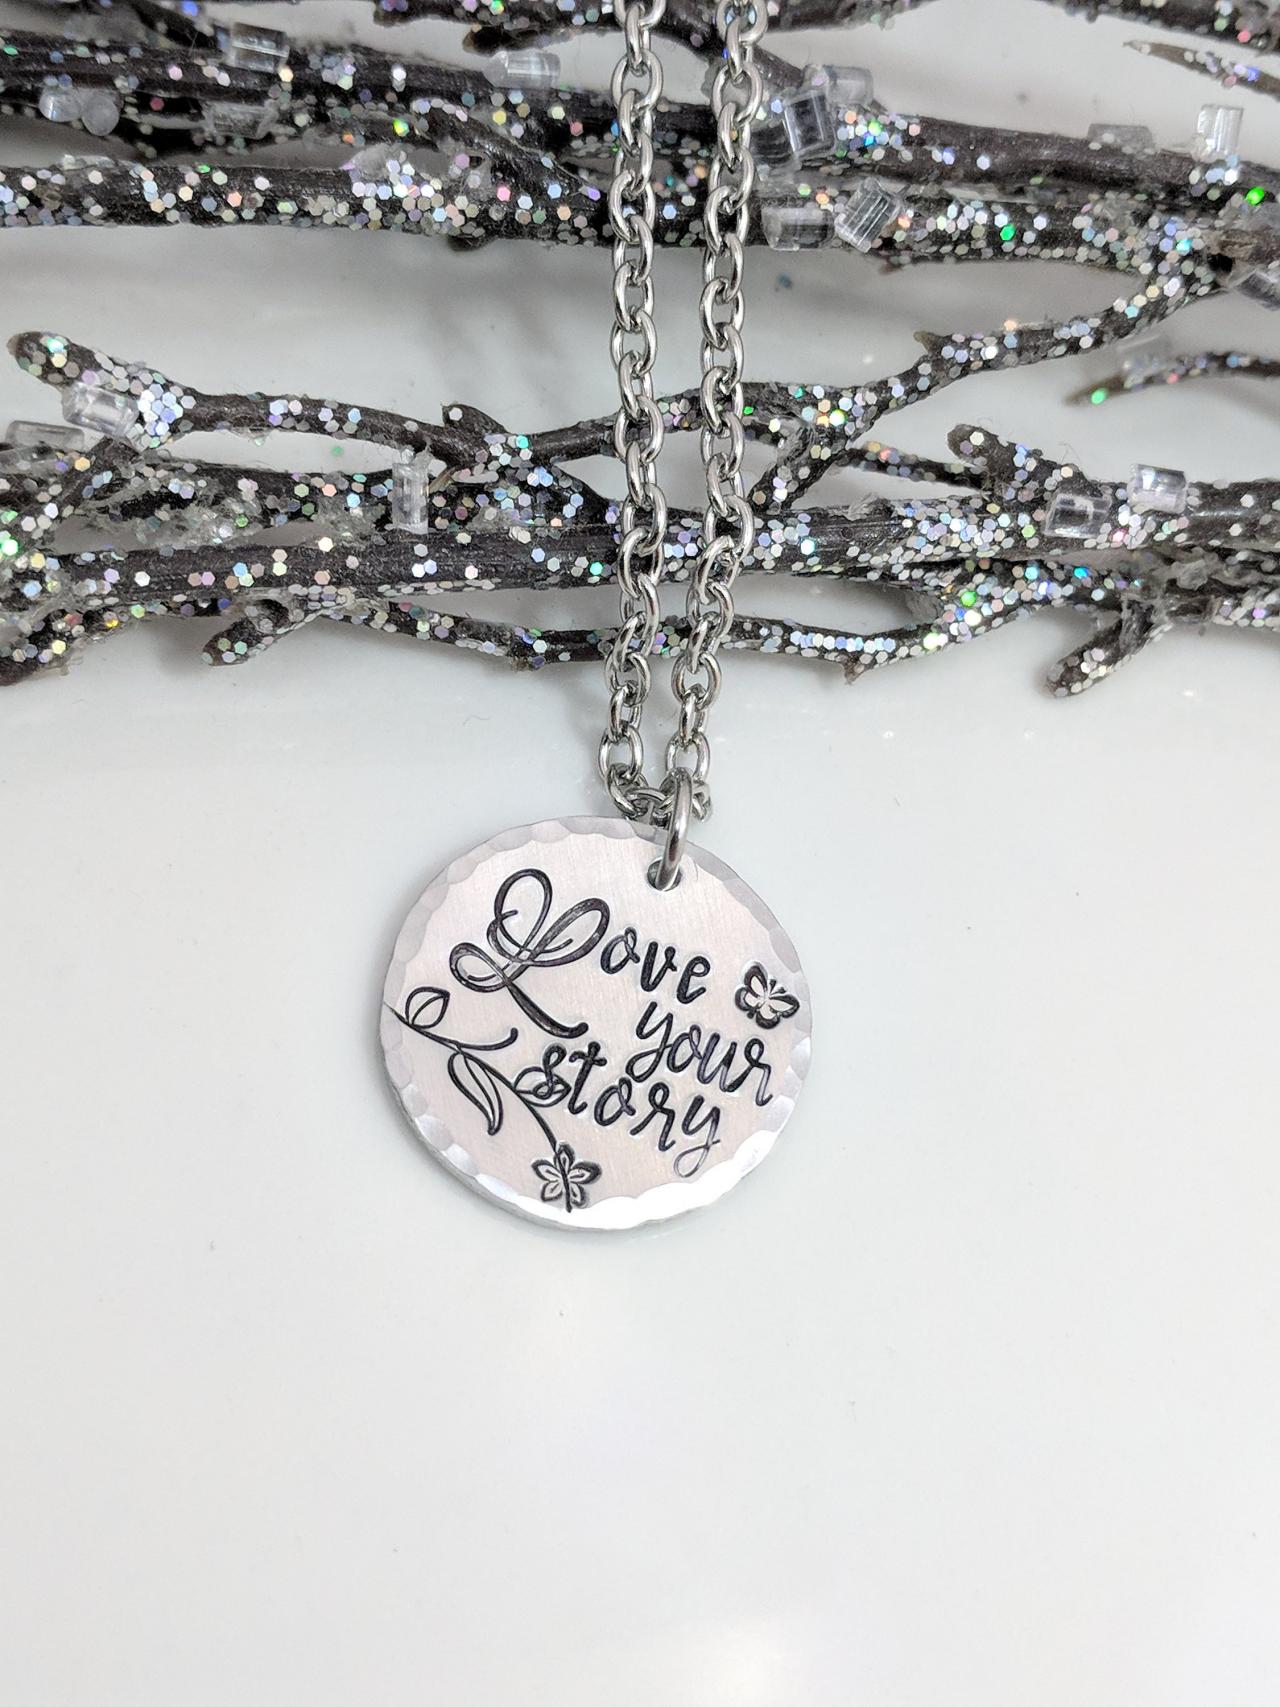 Hand Stamped Necklace Love Your Story- Hand Stamped Jewelry - Motivational Necklace- Inspiration Gift- Quotes- Life Improvement- Defining